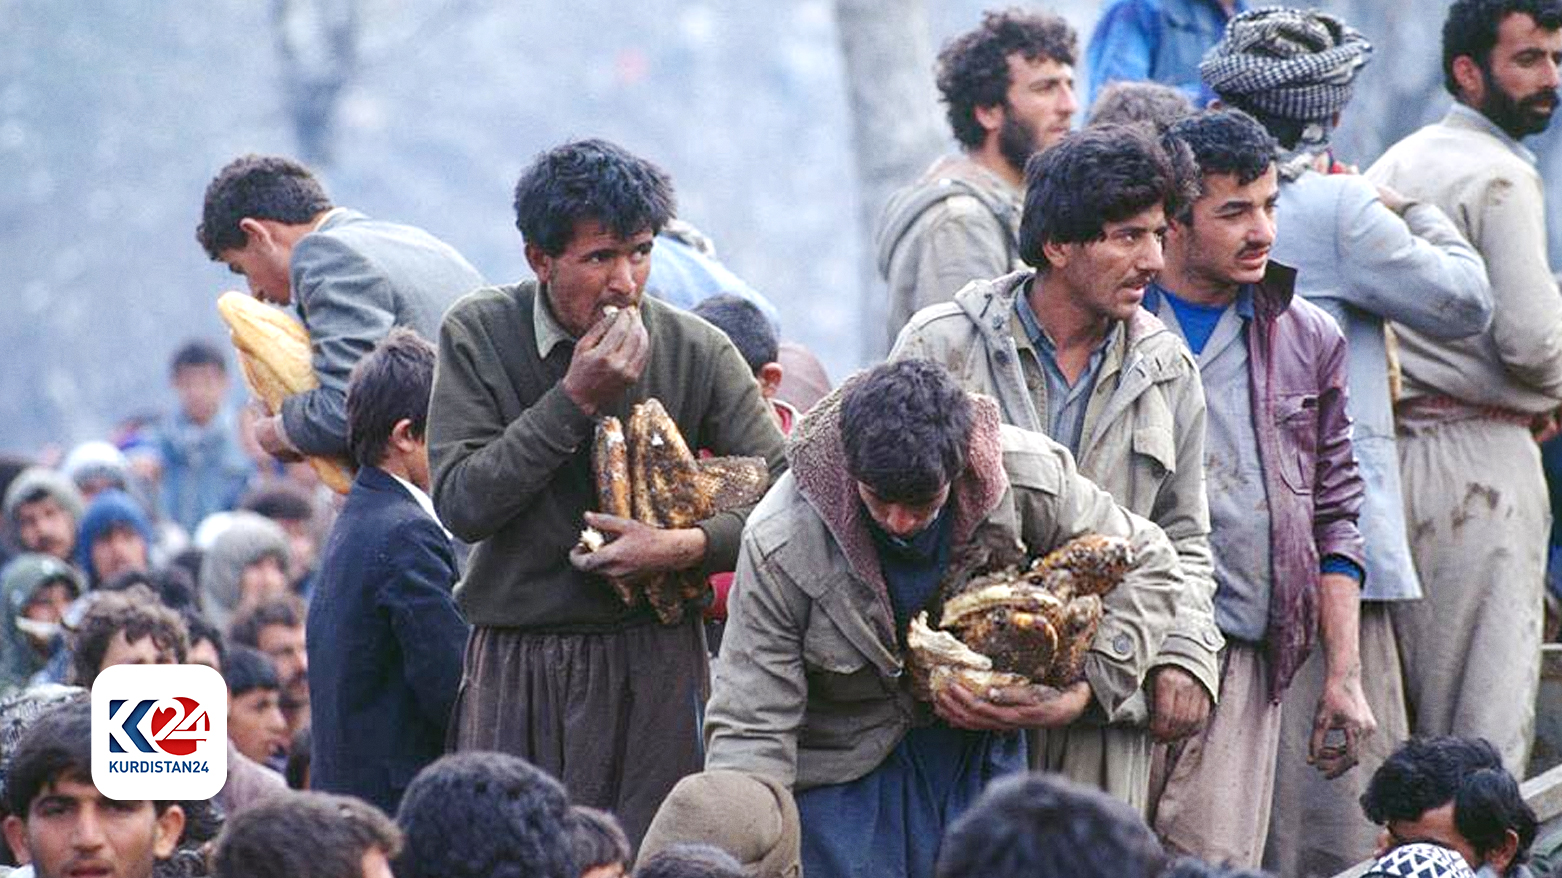 Kurds commemorate rd anniversary of historic migration for freedom